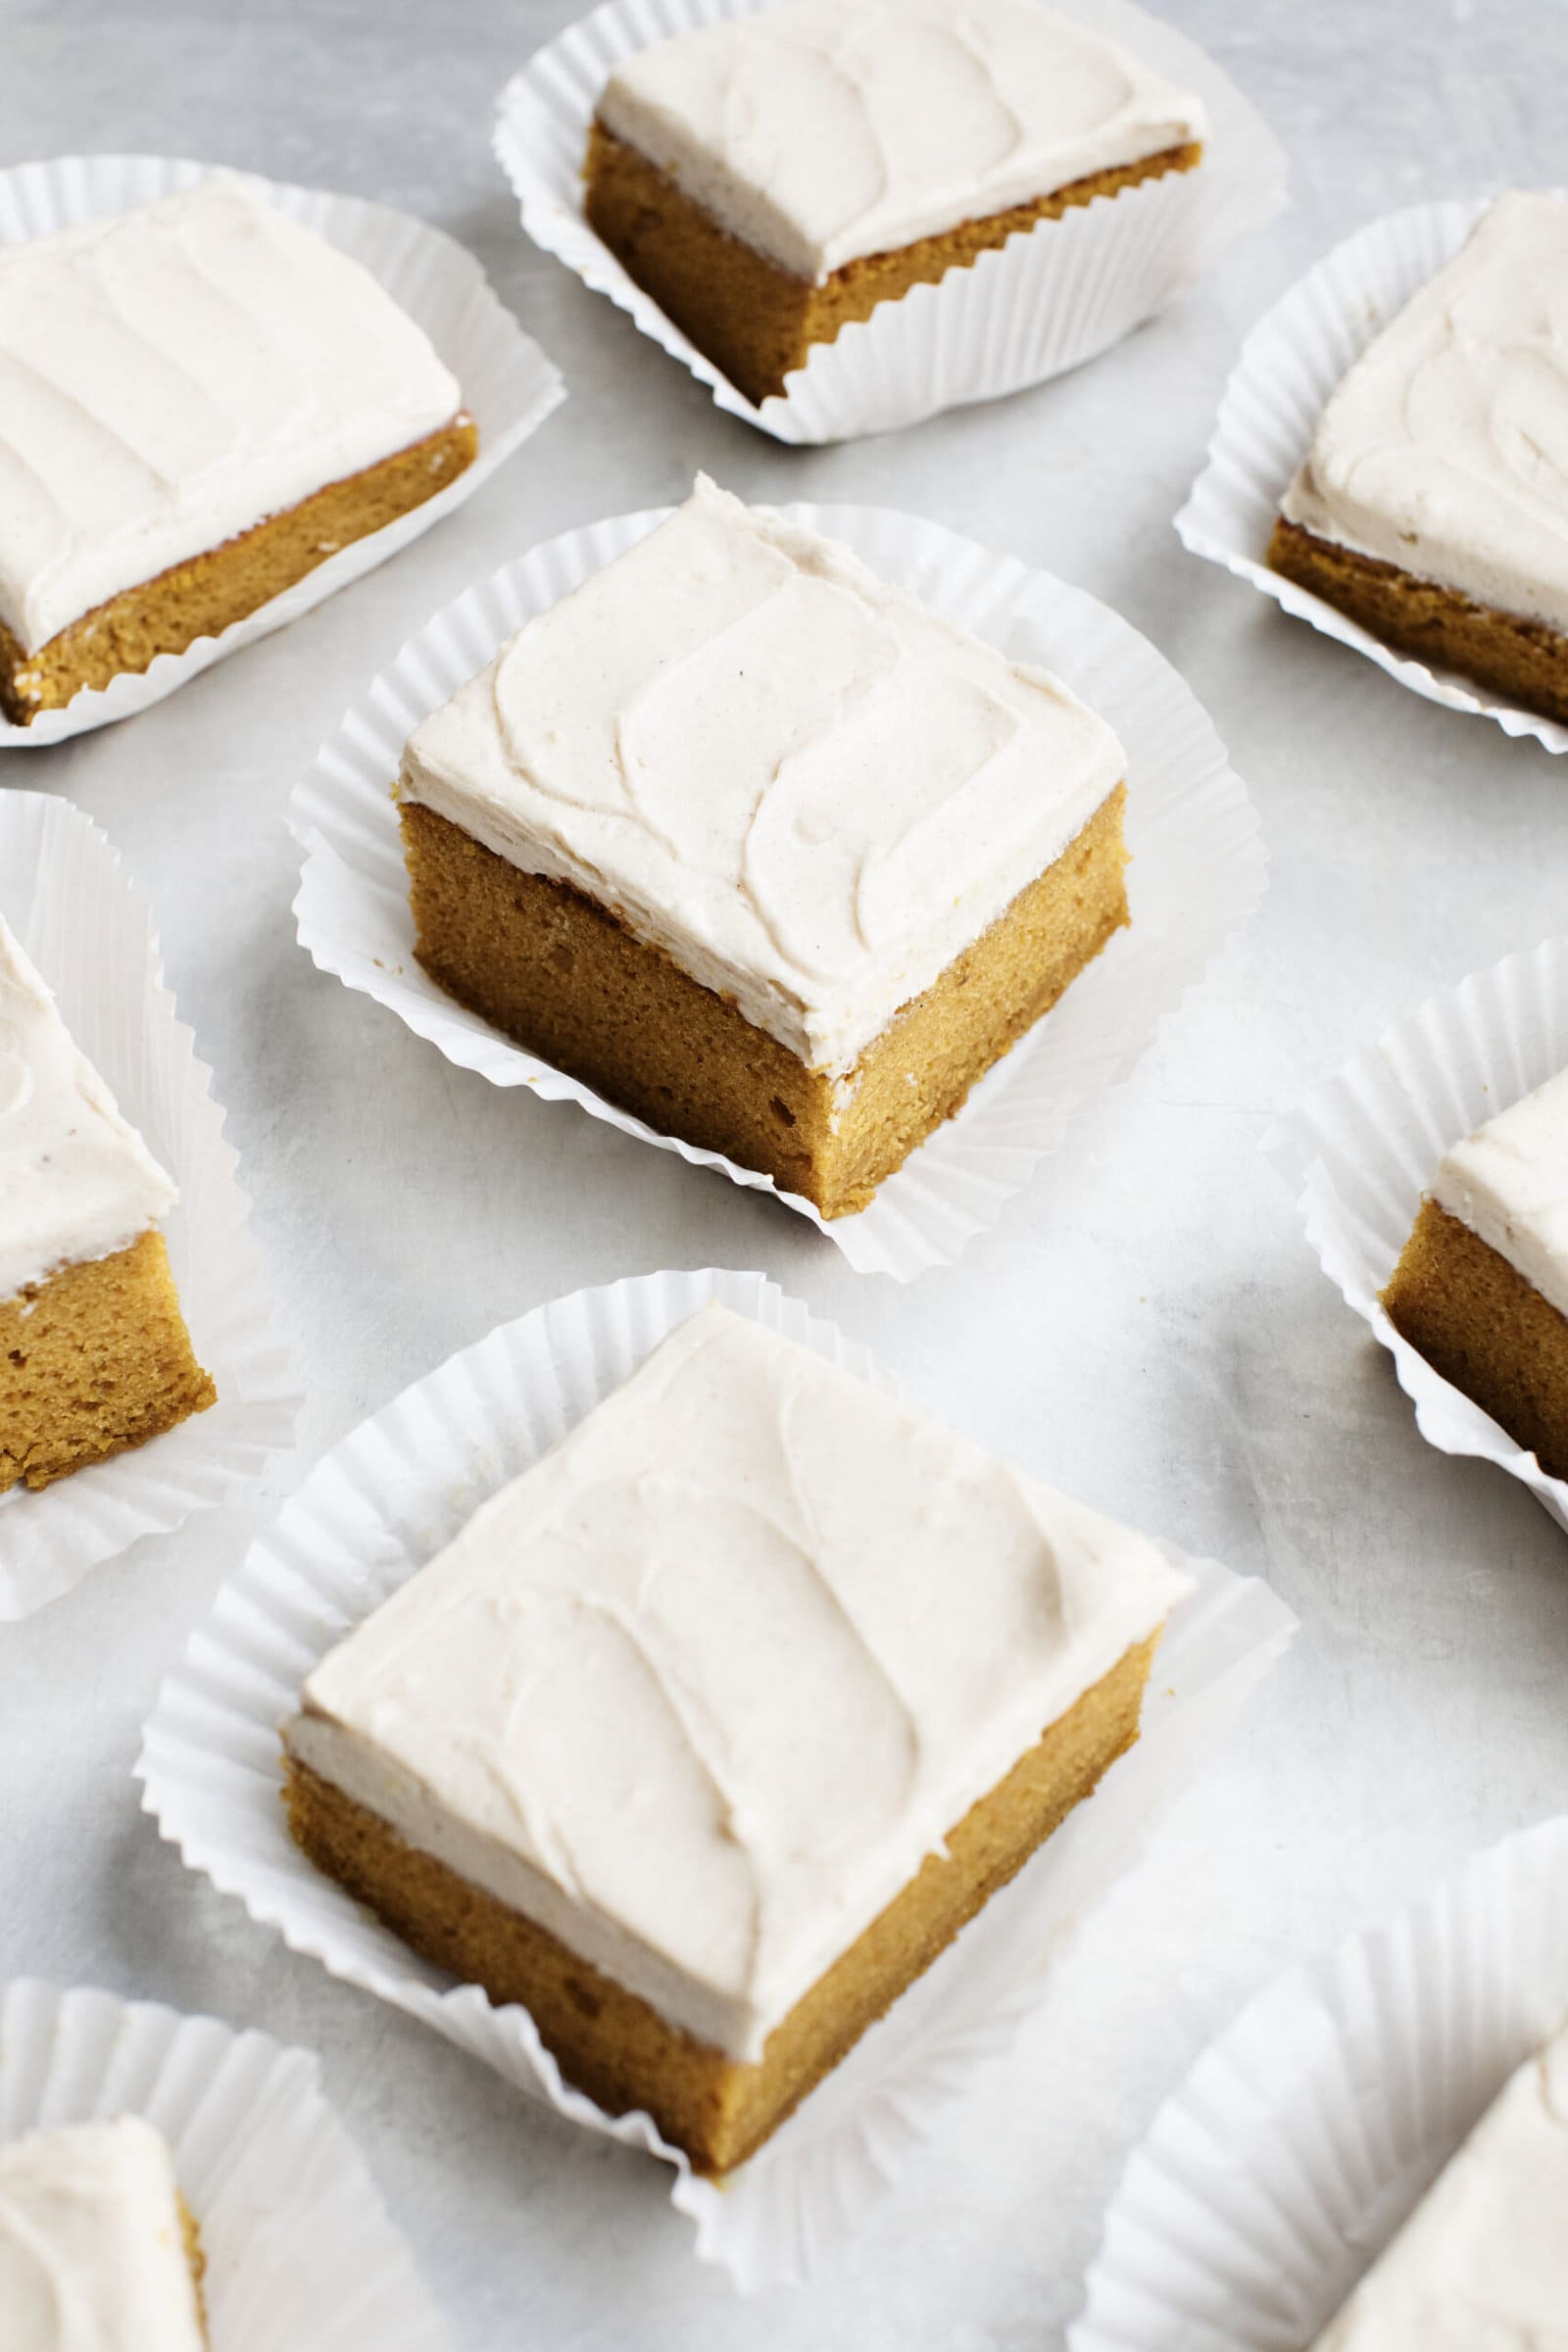 pumpkin bars from yum! Kitchen and Bakery